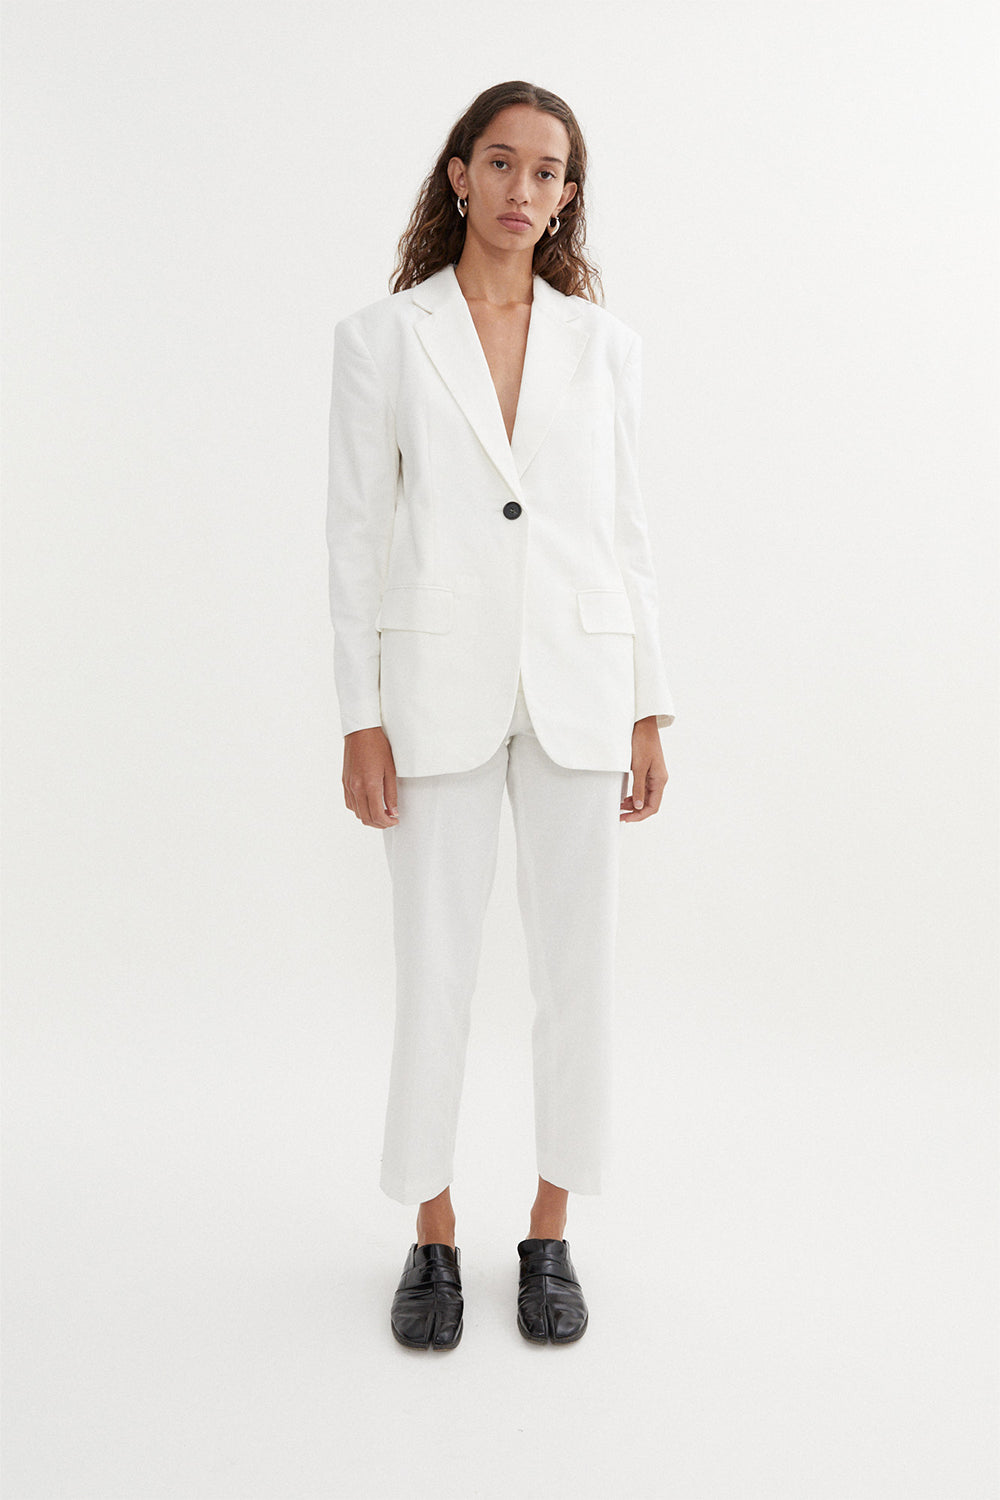 Halston Pants in White by BLANCA